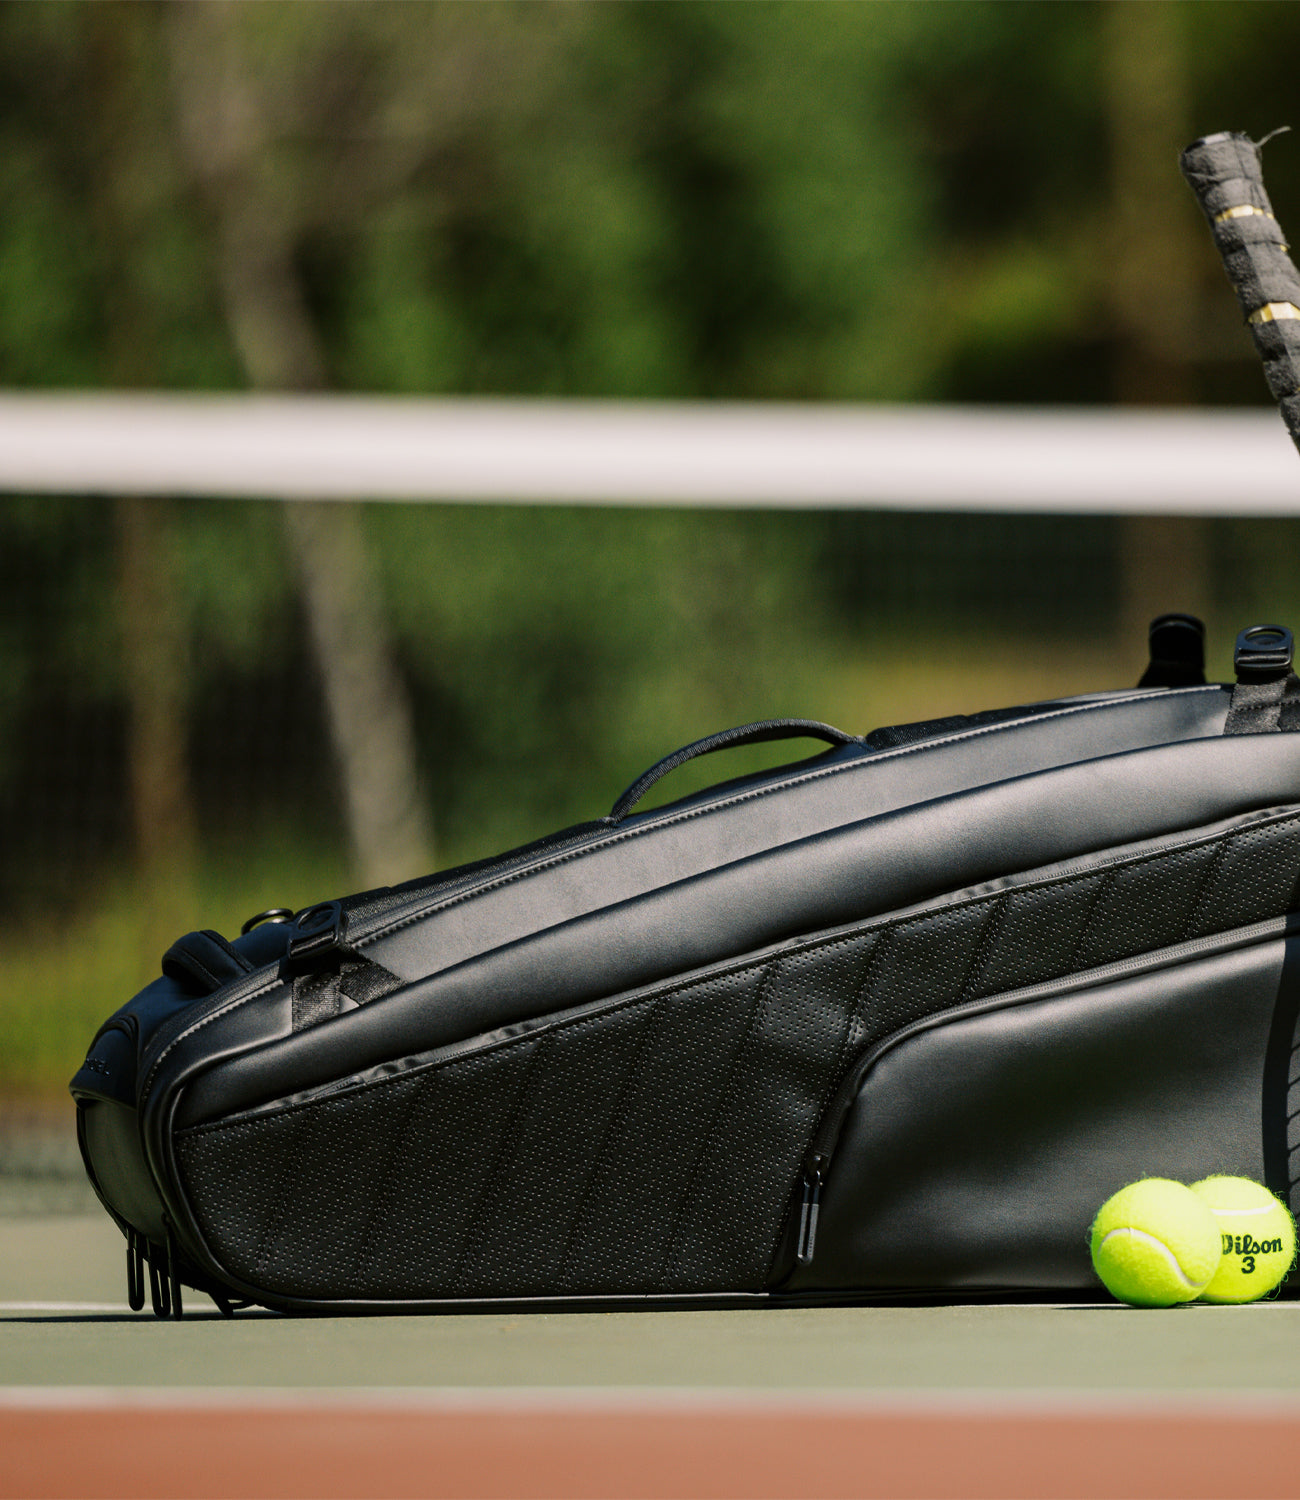 Leather black racquet bag on tennis court with 2 tennis balls and a tennis racquet